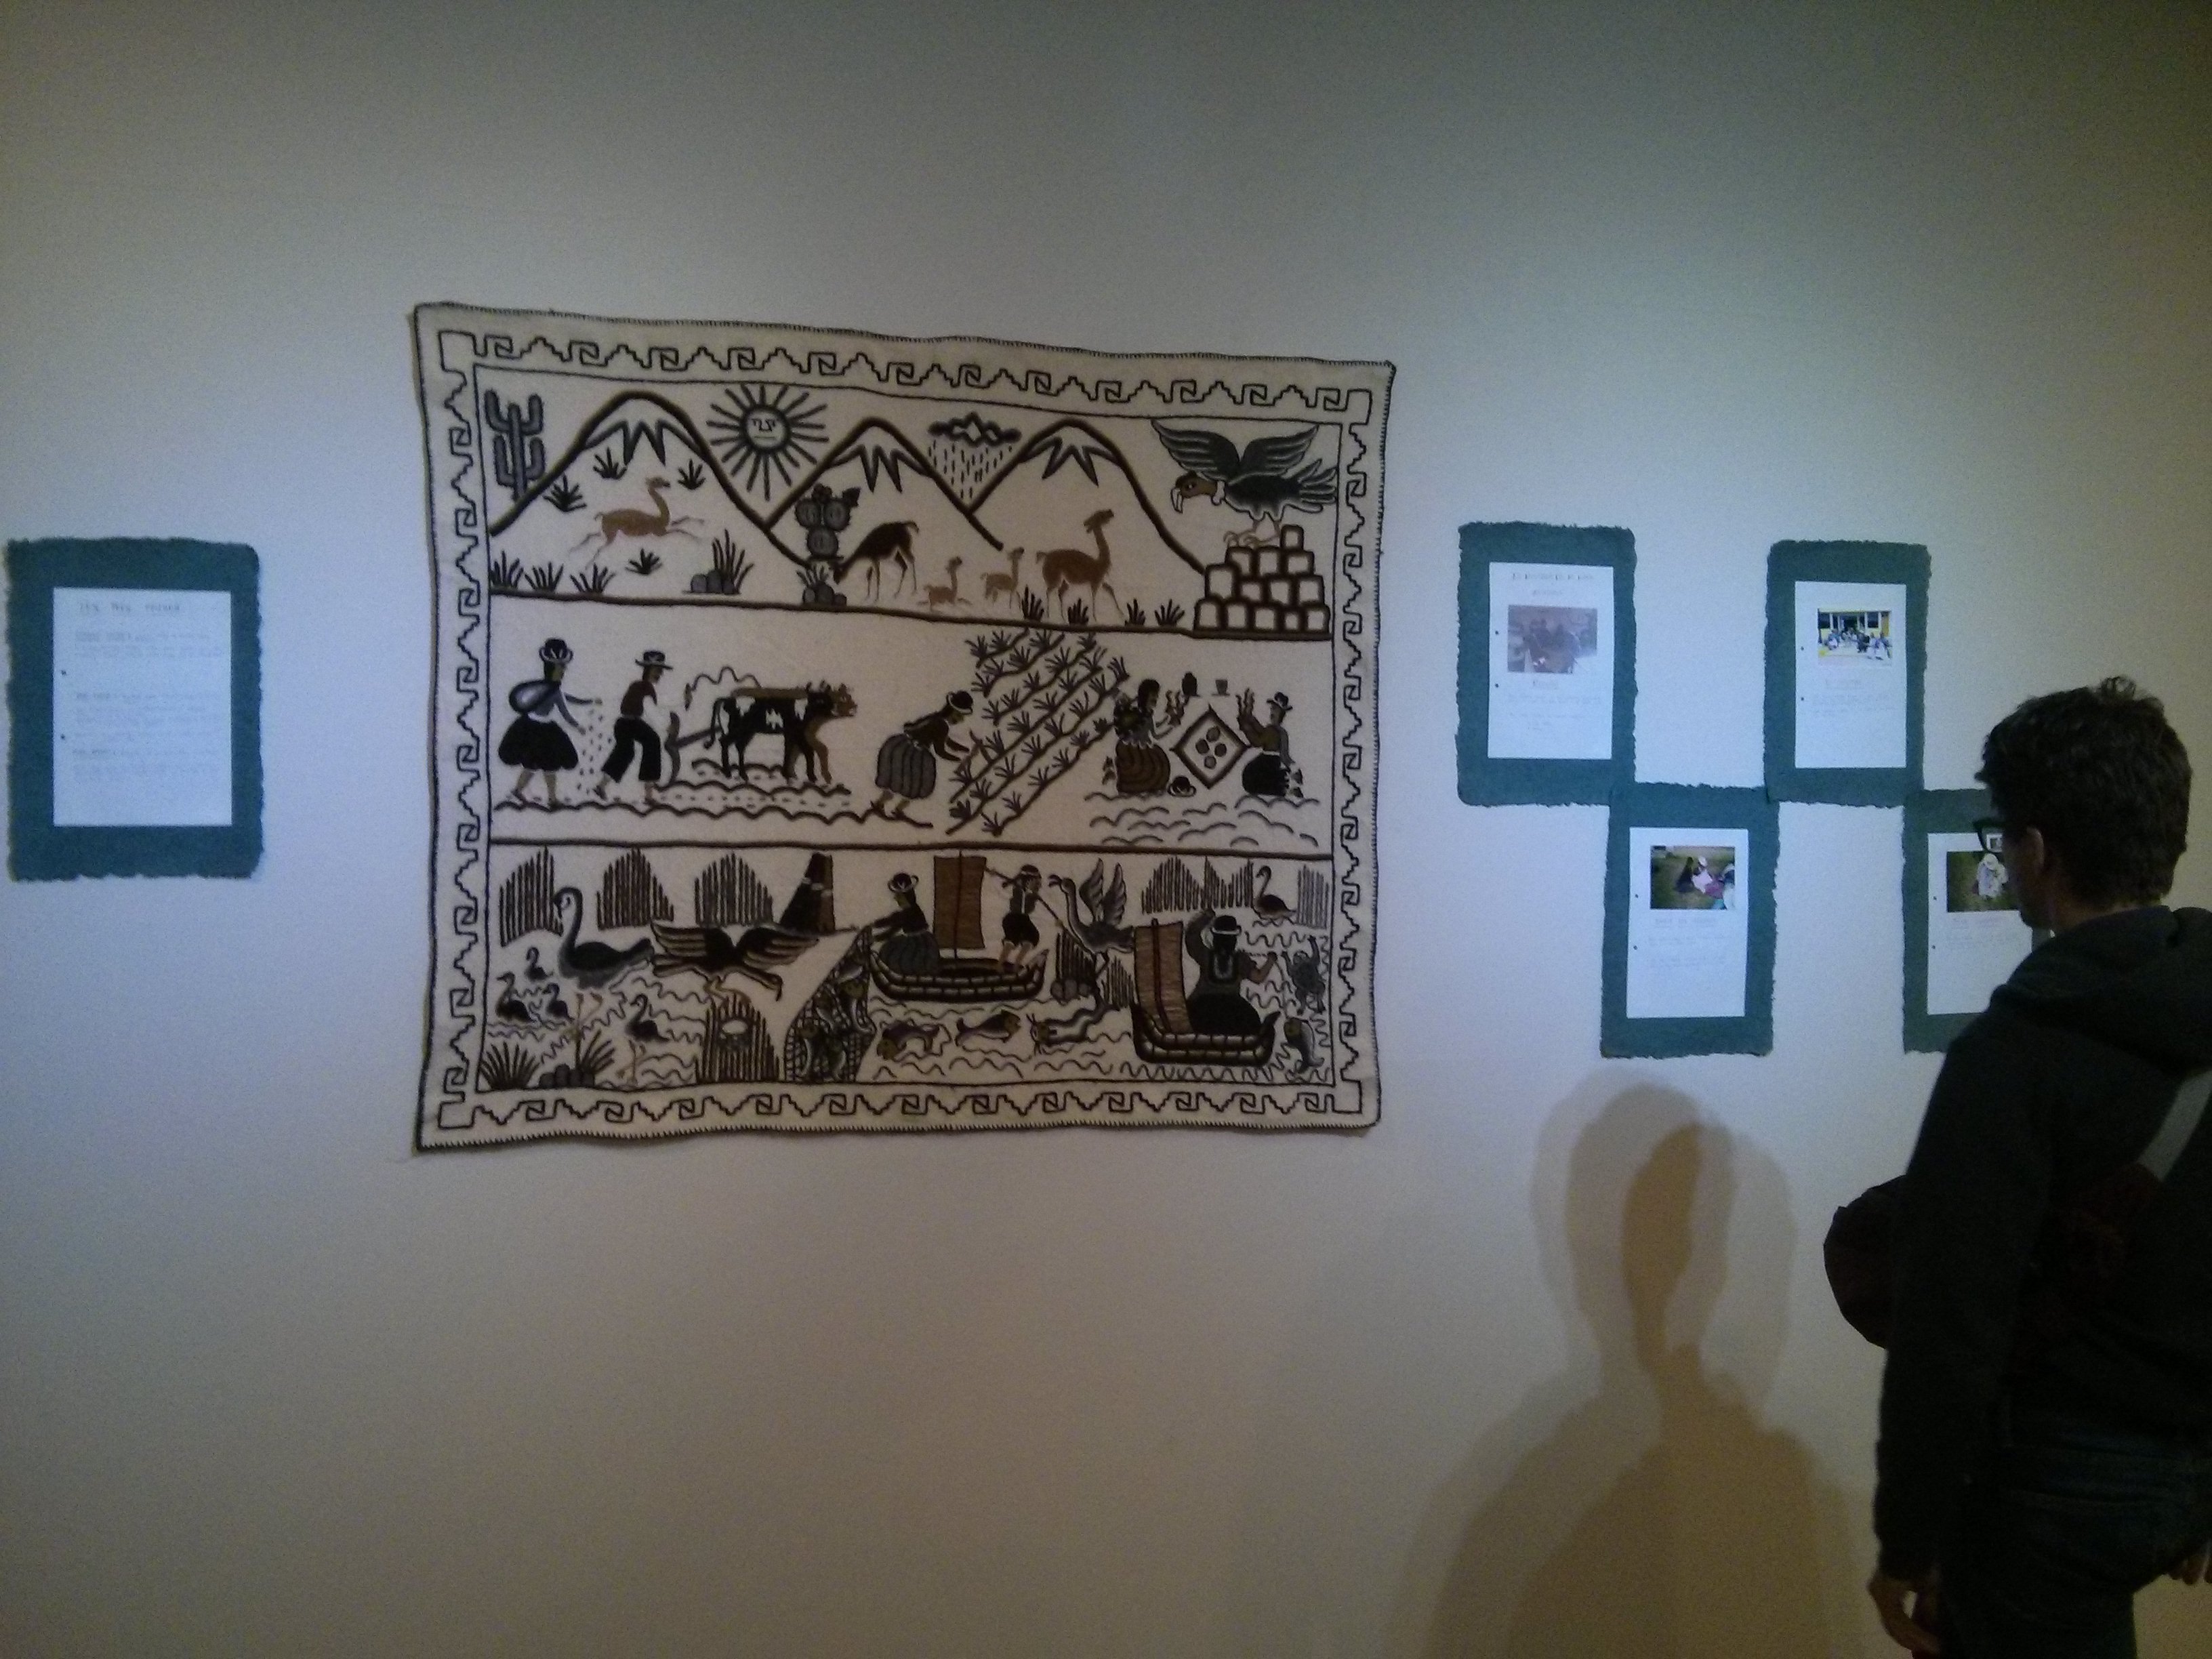 Commissioned "bordado" (embroidery) work by Bartolinas de Olla-Juli (Puno), a women's artisenal association in collaboration with Peruvian feminist agency Movimiento Manuela Ramos.